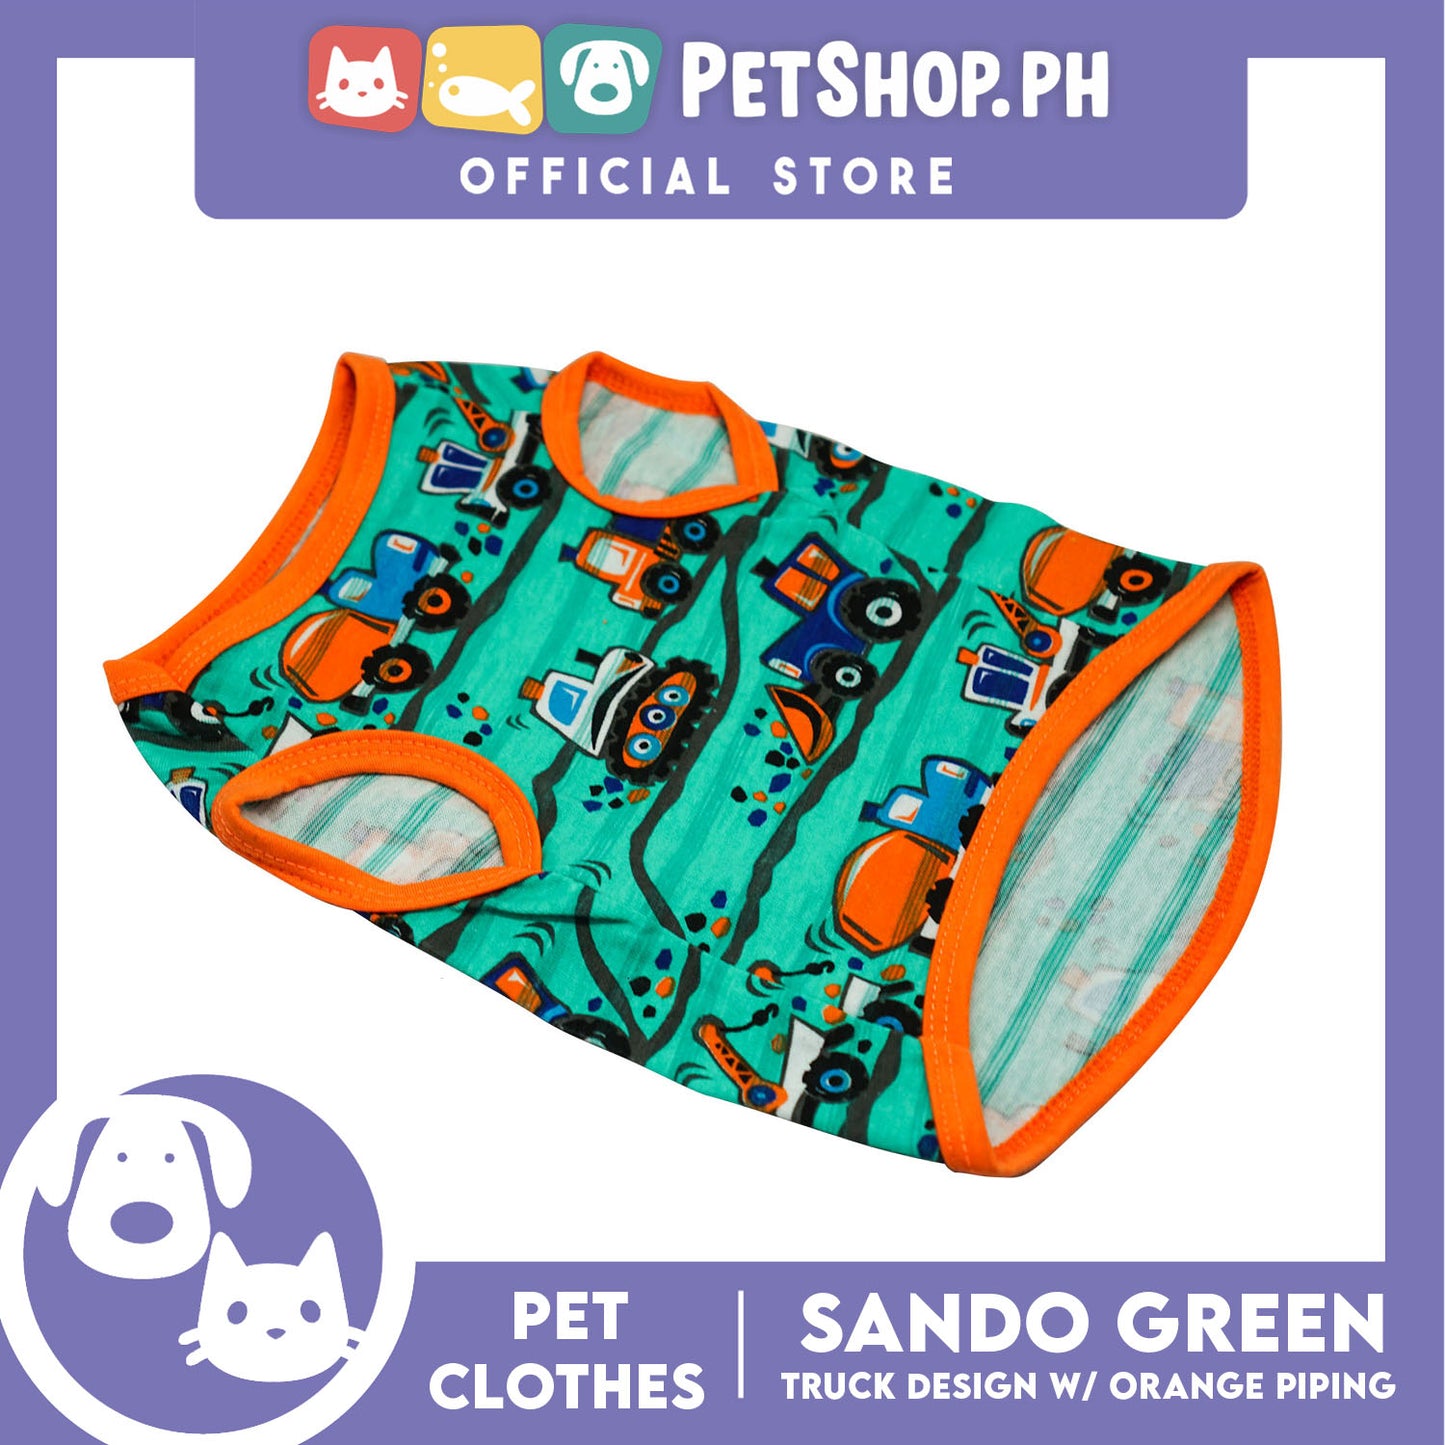 Green Pet Sando with Truck Design with Orange Piping Sleeveless (Extra Large) for Puppy, Small Dogs and Cats